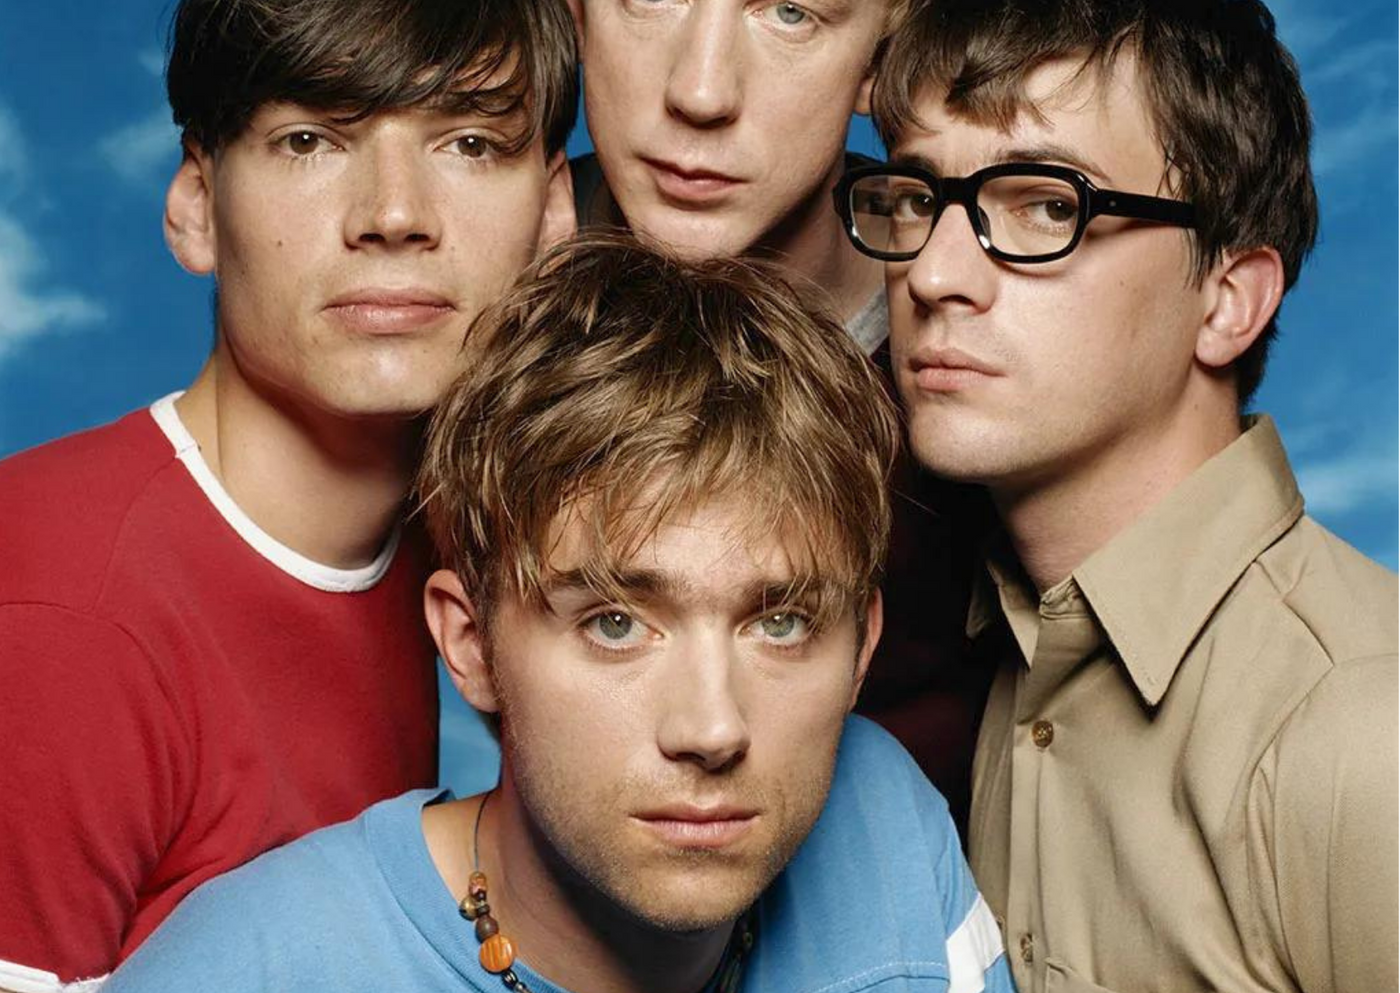 Pictured are the four members of Blur, Alex James, David Rowntree, Graham Coxon and Damon Albarn (clockwise beginning from far left) looking into the camera in front of a blue background.